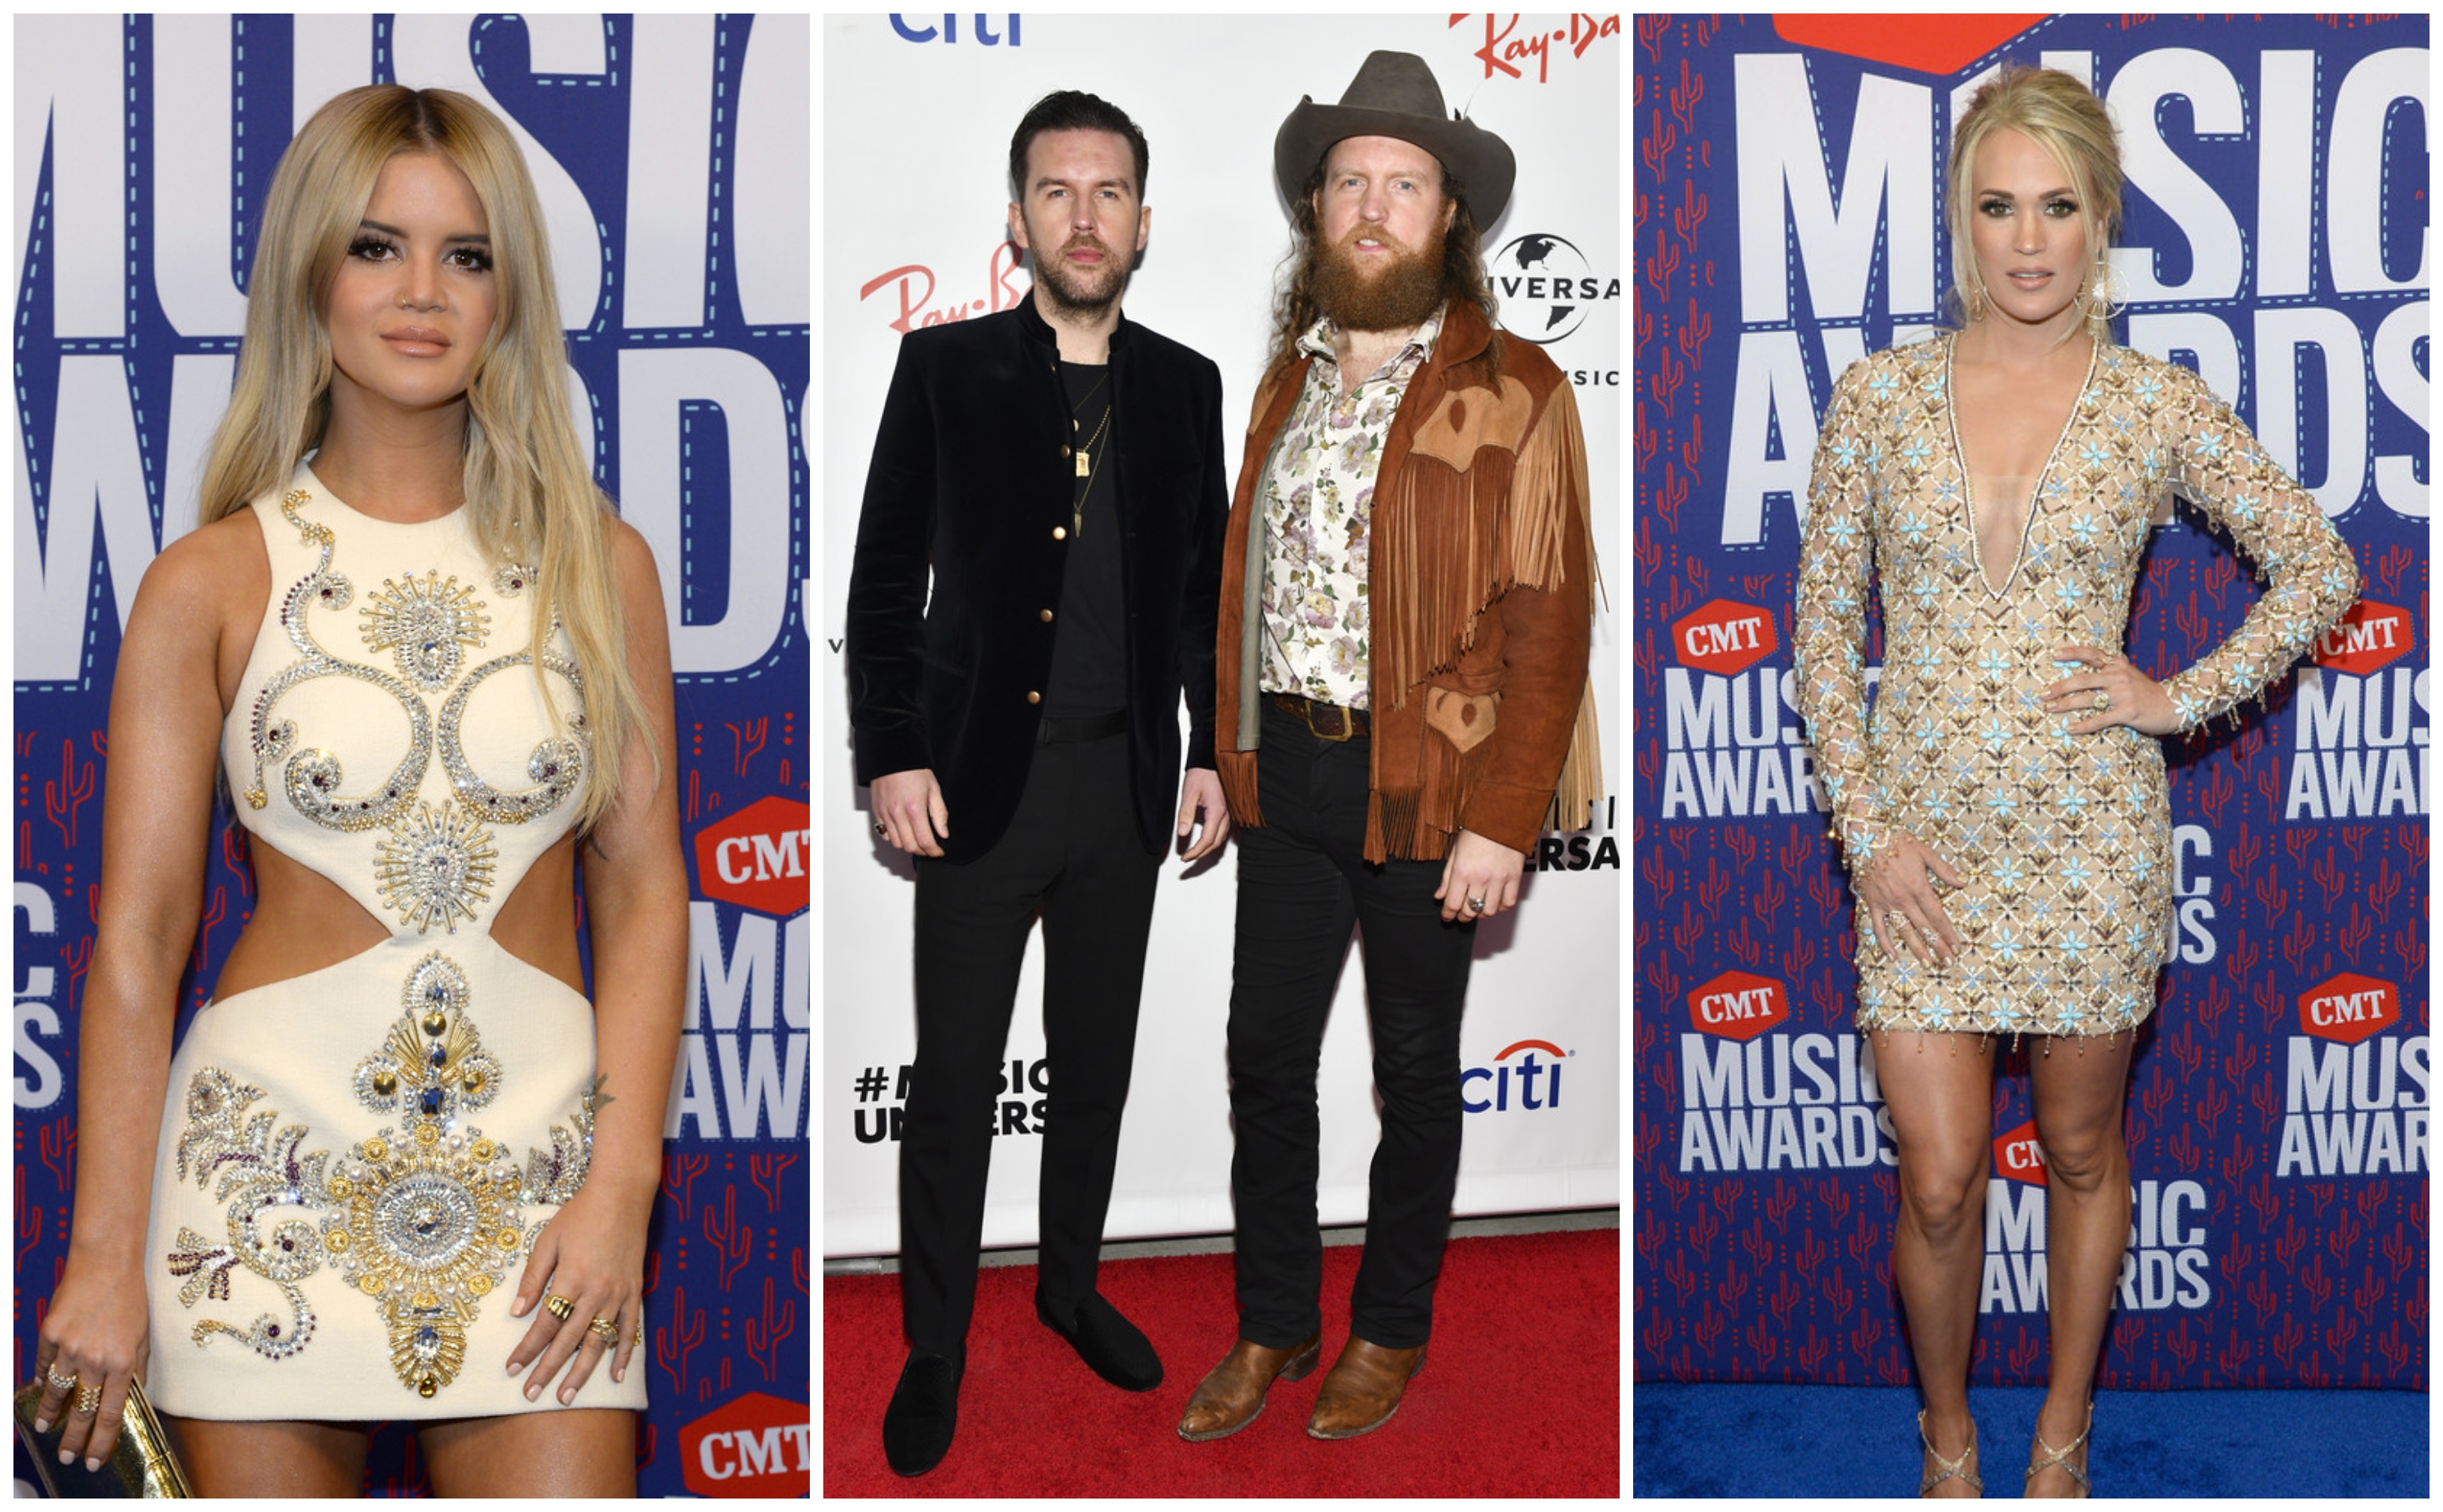 Maren Morris, Brothers Osborne and Carrie Underwood Receive Top Nominations for 53rd Annual CMA Awards